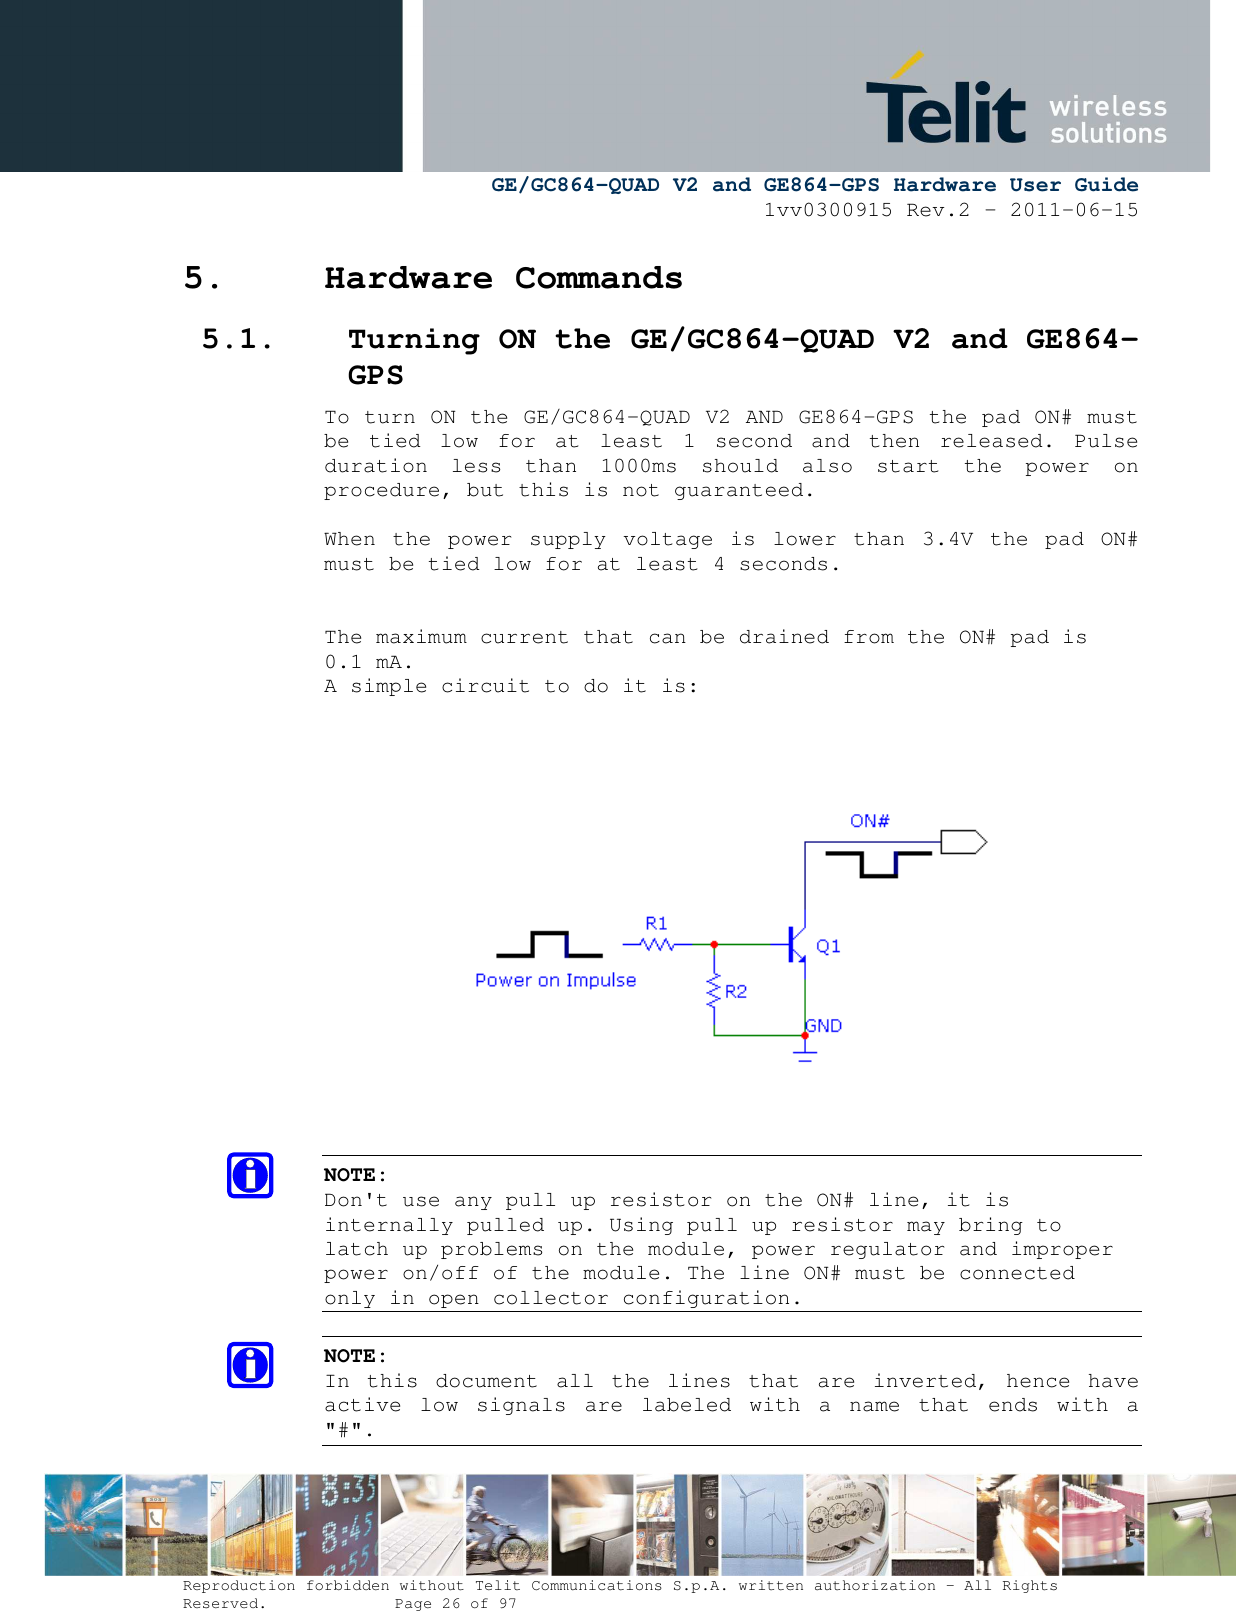      GE/GC864-QUAD V2 and GE864-GPS Hardware User Guide 1vv0300915 Rev.2 – 2011-06-15  Reproduction forbidden without Telit Communications S.p.A. written authorization - All Rights Reserved.    Page 26 of 97  5. Hardware Commands 5.1. Turning ON the GE/GC864-QUAD V2 and GE864-GPS To turn ON the GE/GC864-QUAD V2 AND GE864-GPS the pad ON# must be  tied  low  for  at  least  1  second  and  then  released.  Pulse duration  less  than  1000ms  should  also  start  the  power  on procedure, but this is not guaranteed.  When  the  power  supply  voltage  is  lower  than  3.4V  the  pad  ON# must be tied low for at least 4 seconds.   The maximum current that can be drained from the ON# pad is 0.1 mA. A simple circuit to do it is:         NOTE: Don&apos;t use any pull up resistor on the ON# line, it is internally pulled up. Using pull up resistor may bring to latch up problems on the module, power regulator and improper power on/off of the module. The line ON# must be connected only in open collector configuration.  NOTE: In  this  document  all  the  lines  that  are  inverted,  hence  have active  low  signals  are  labeled  with  a  name  that  ends  with  a &quot;#&quot;. 